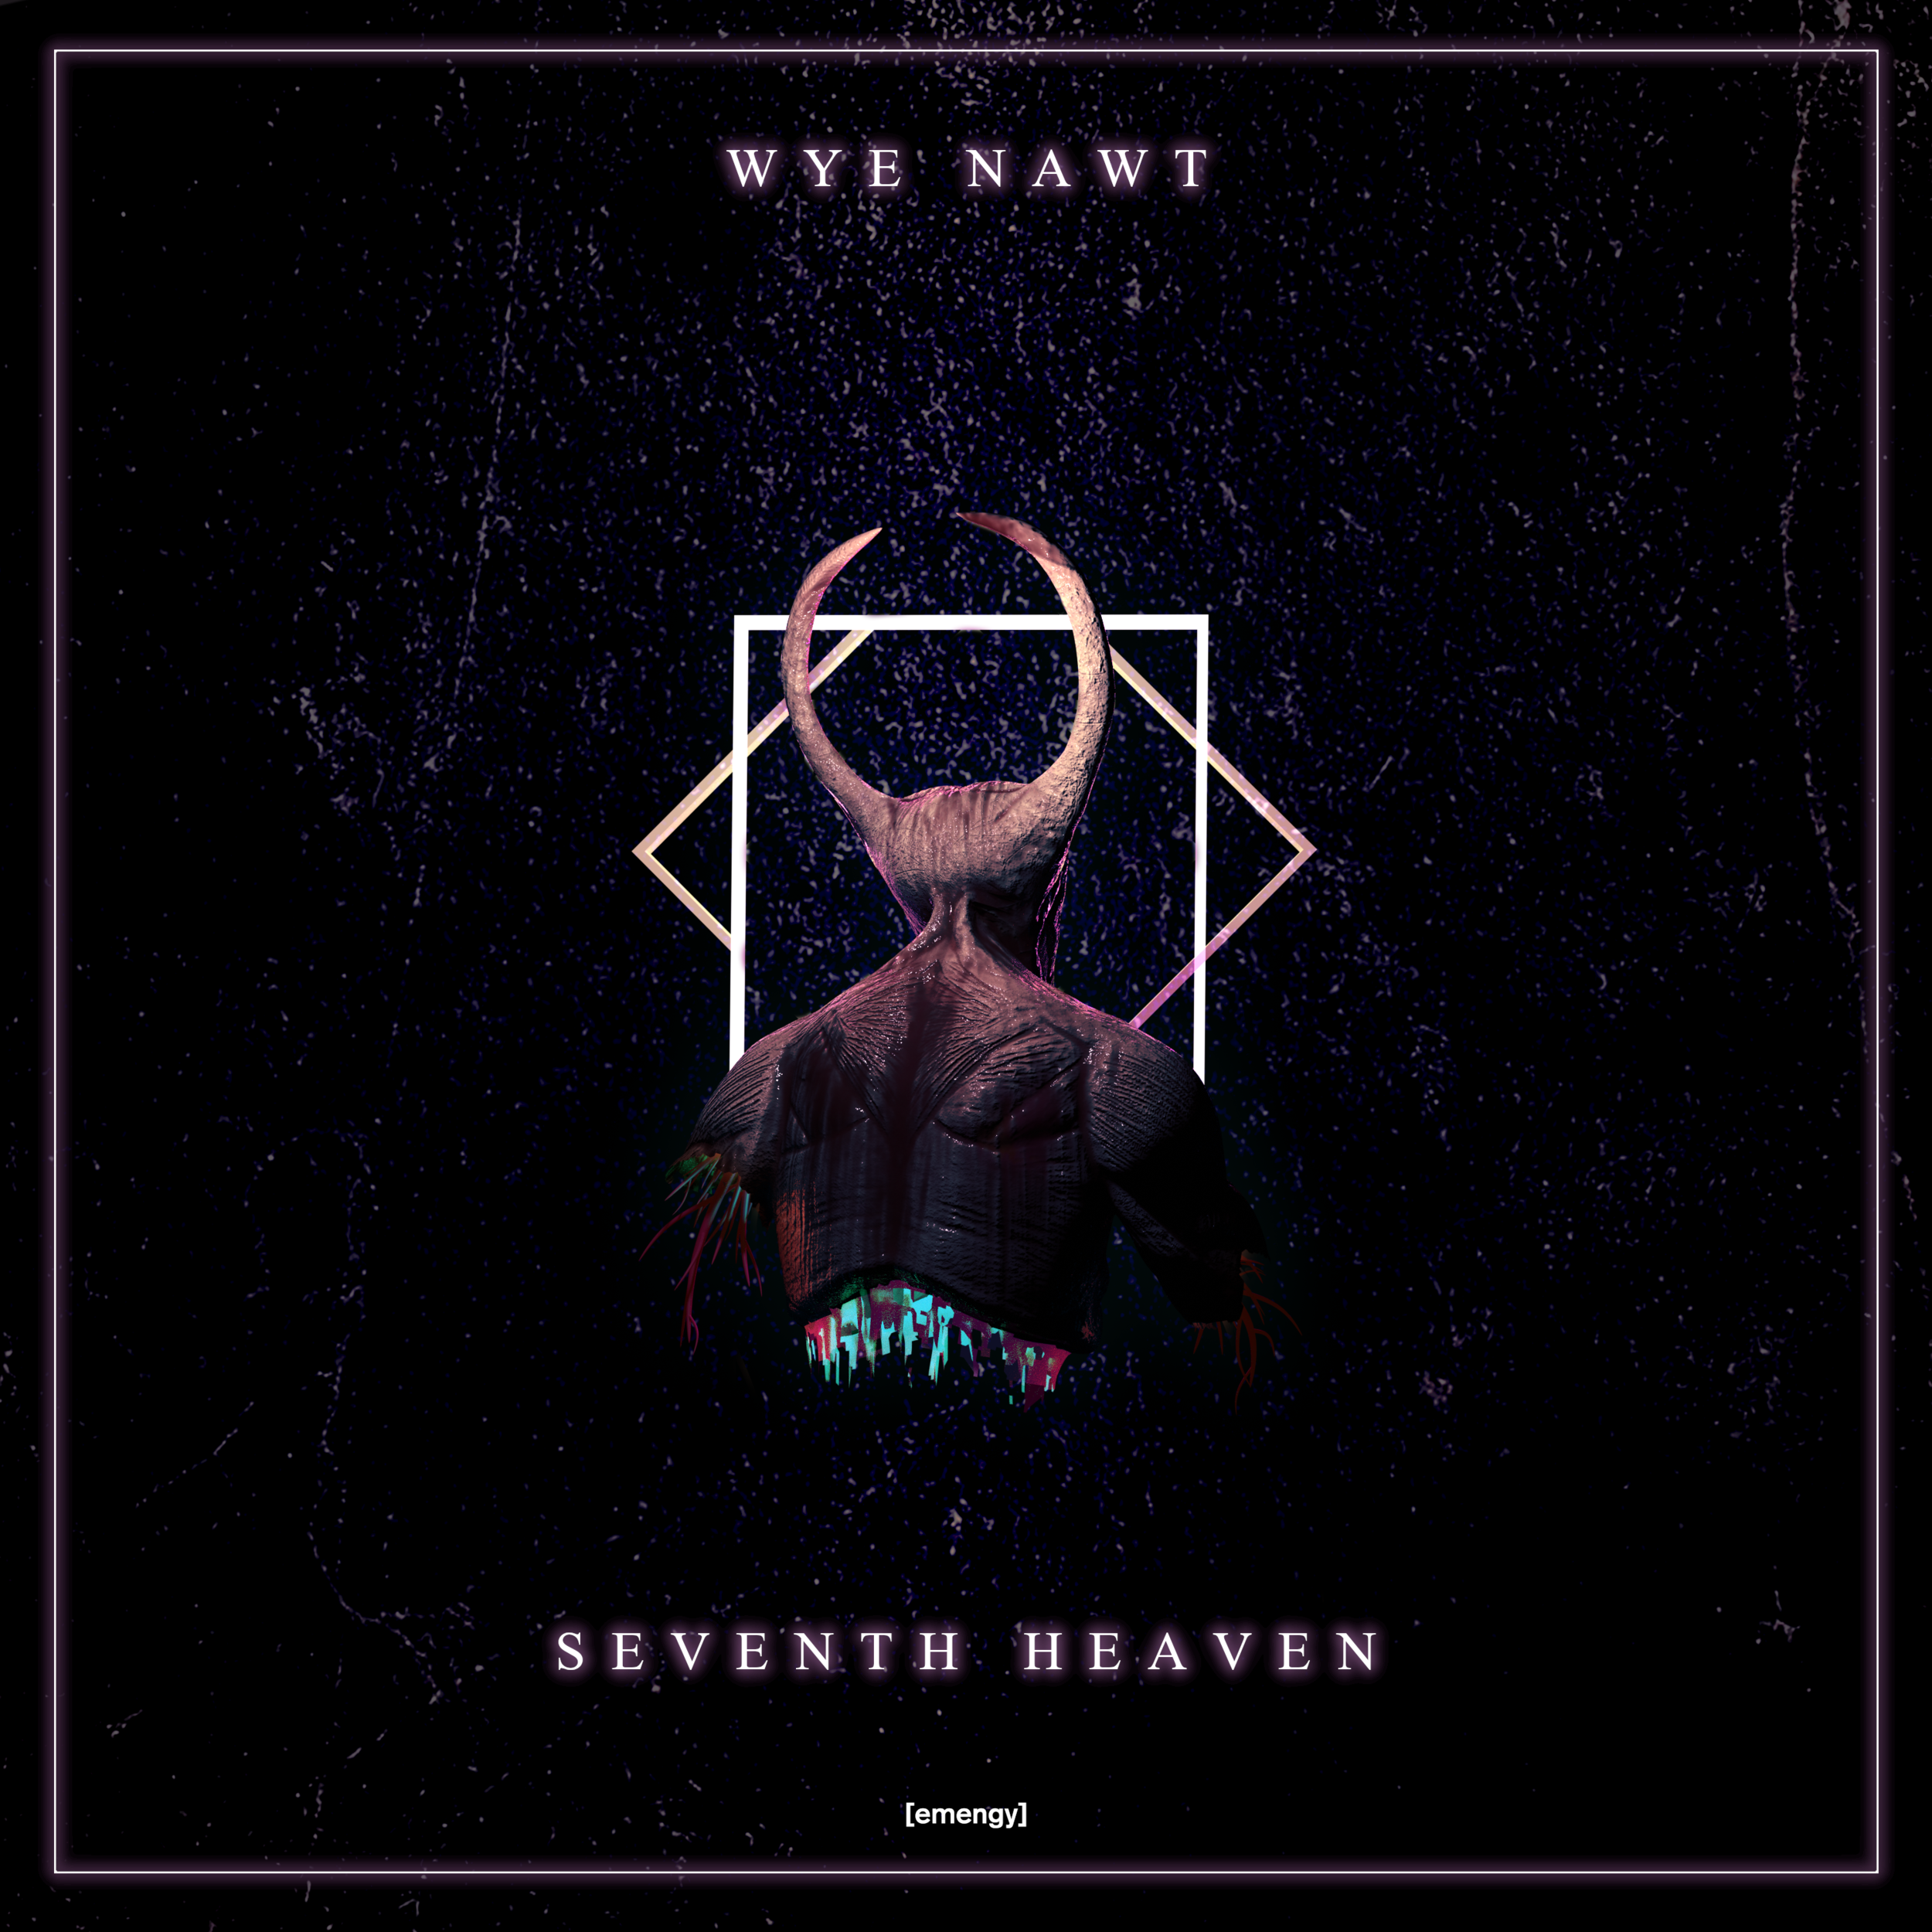 Wye Nawt - Seventh Heaven (COVER).png